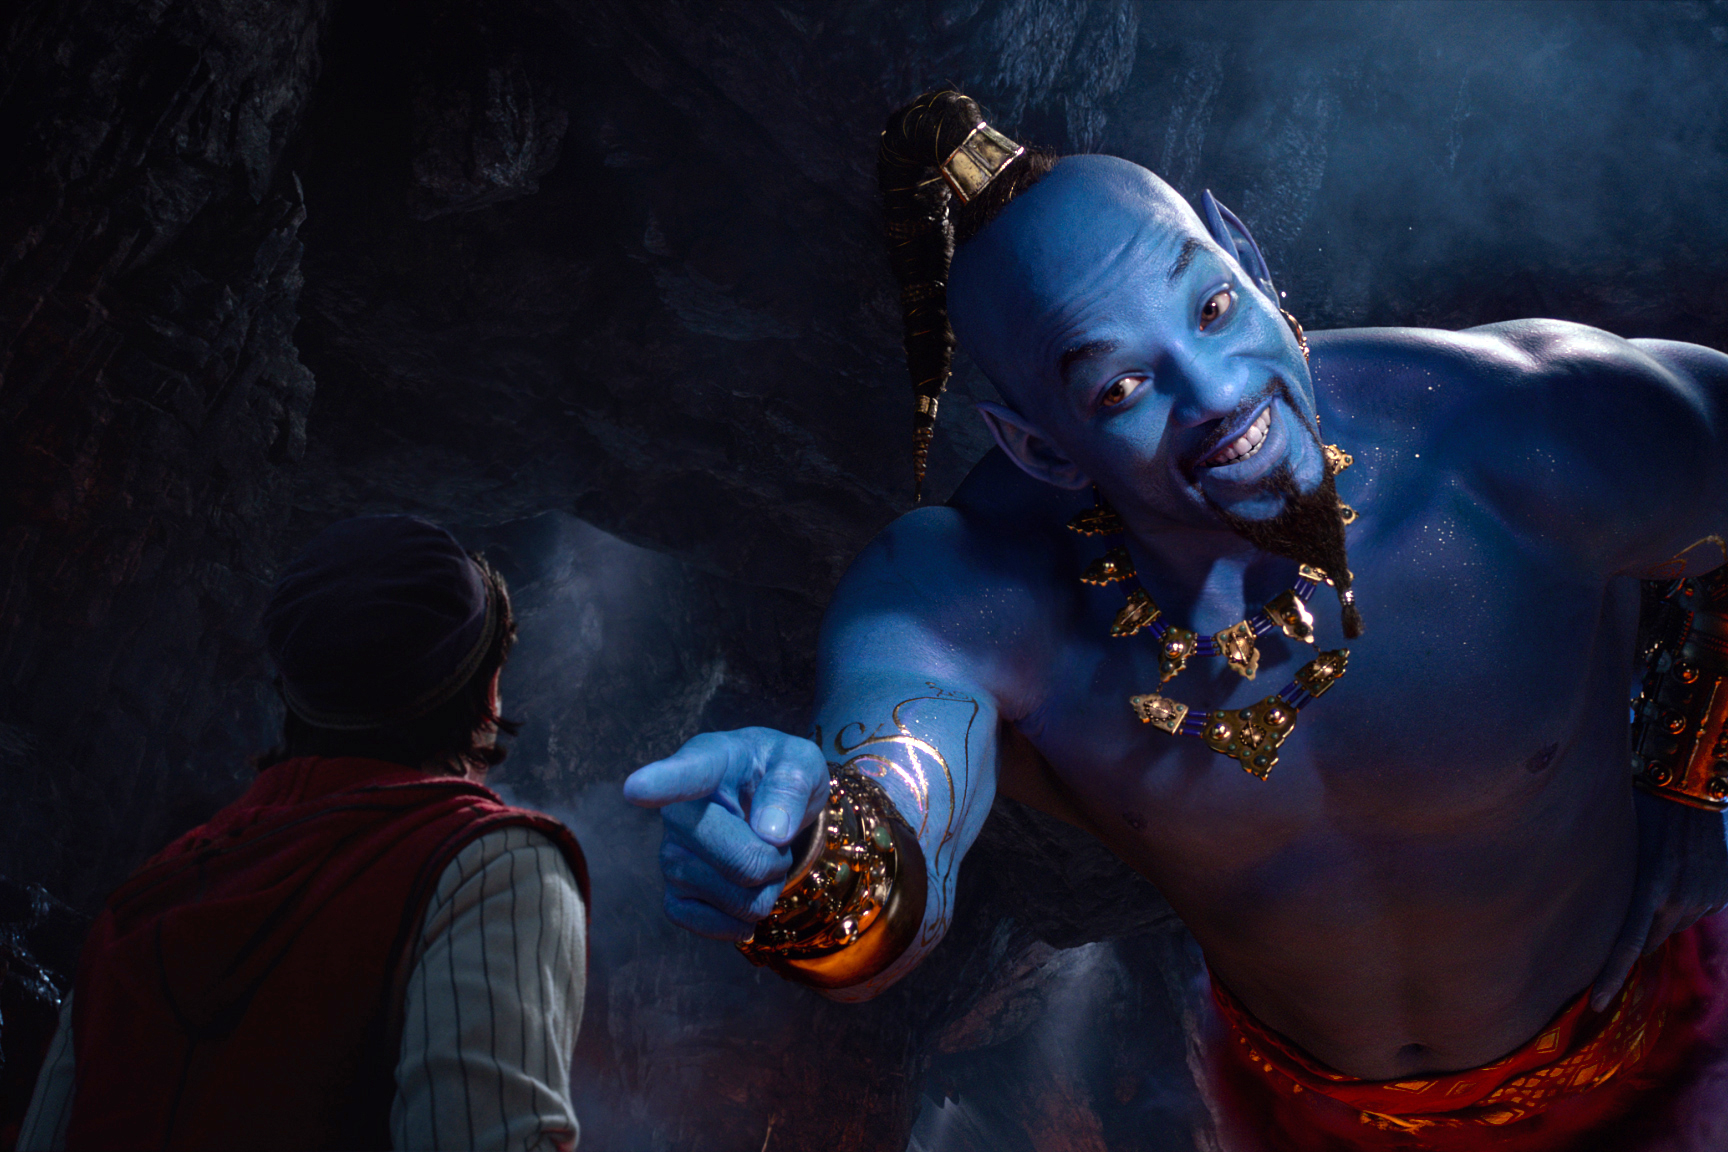 Aladdin (Mena Massoud) meets the larger-than-life blue Genie (Will Smith) in Disney’s live-action adaptation ALADDIN, directed by Guy Ritchie.